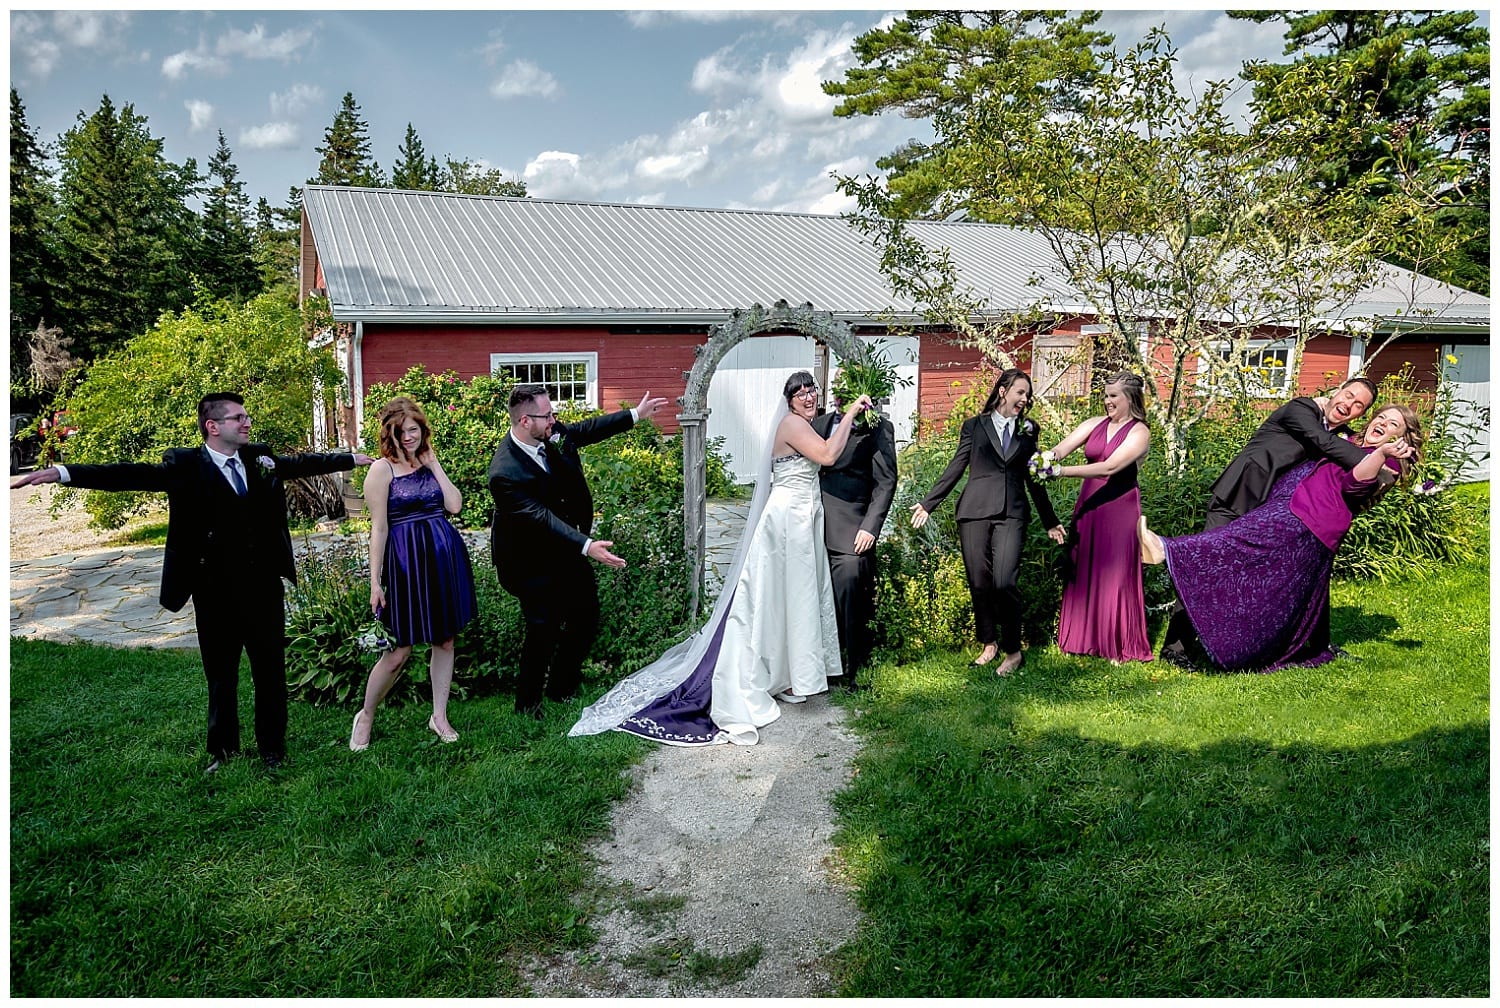 The wedding party have fun creating unqiue wedding photos for the bride and groom during their wedding at the Hubbard's Barn in Nova Scotia.